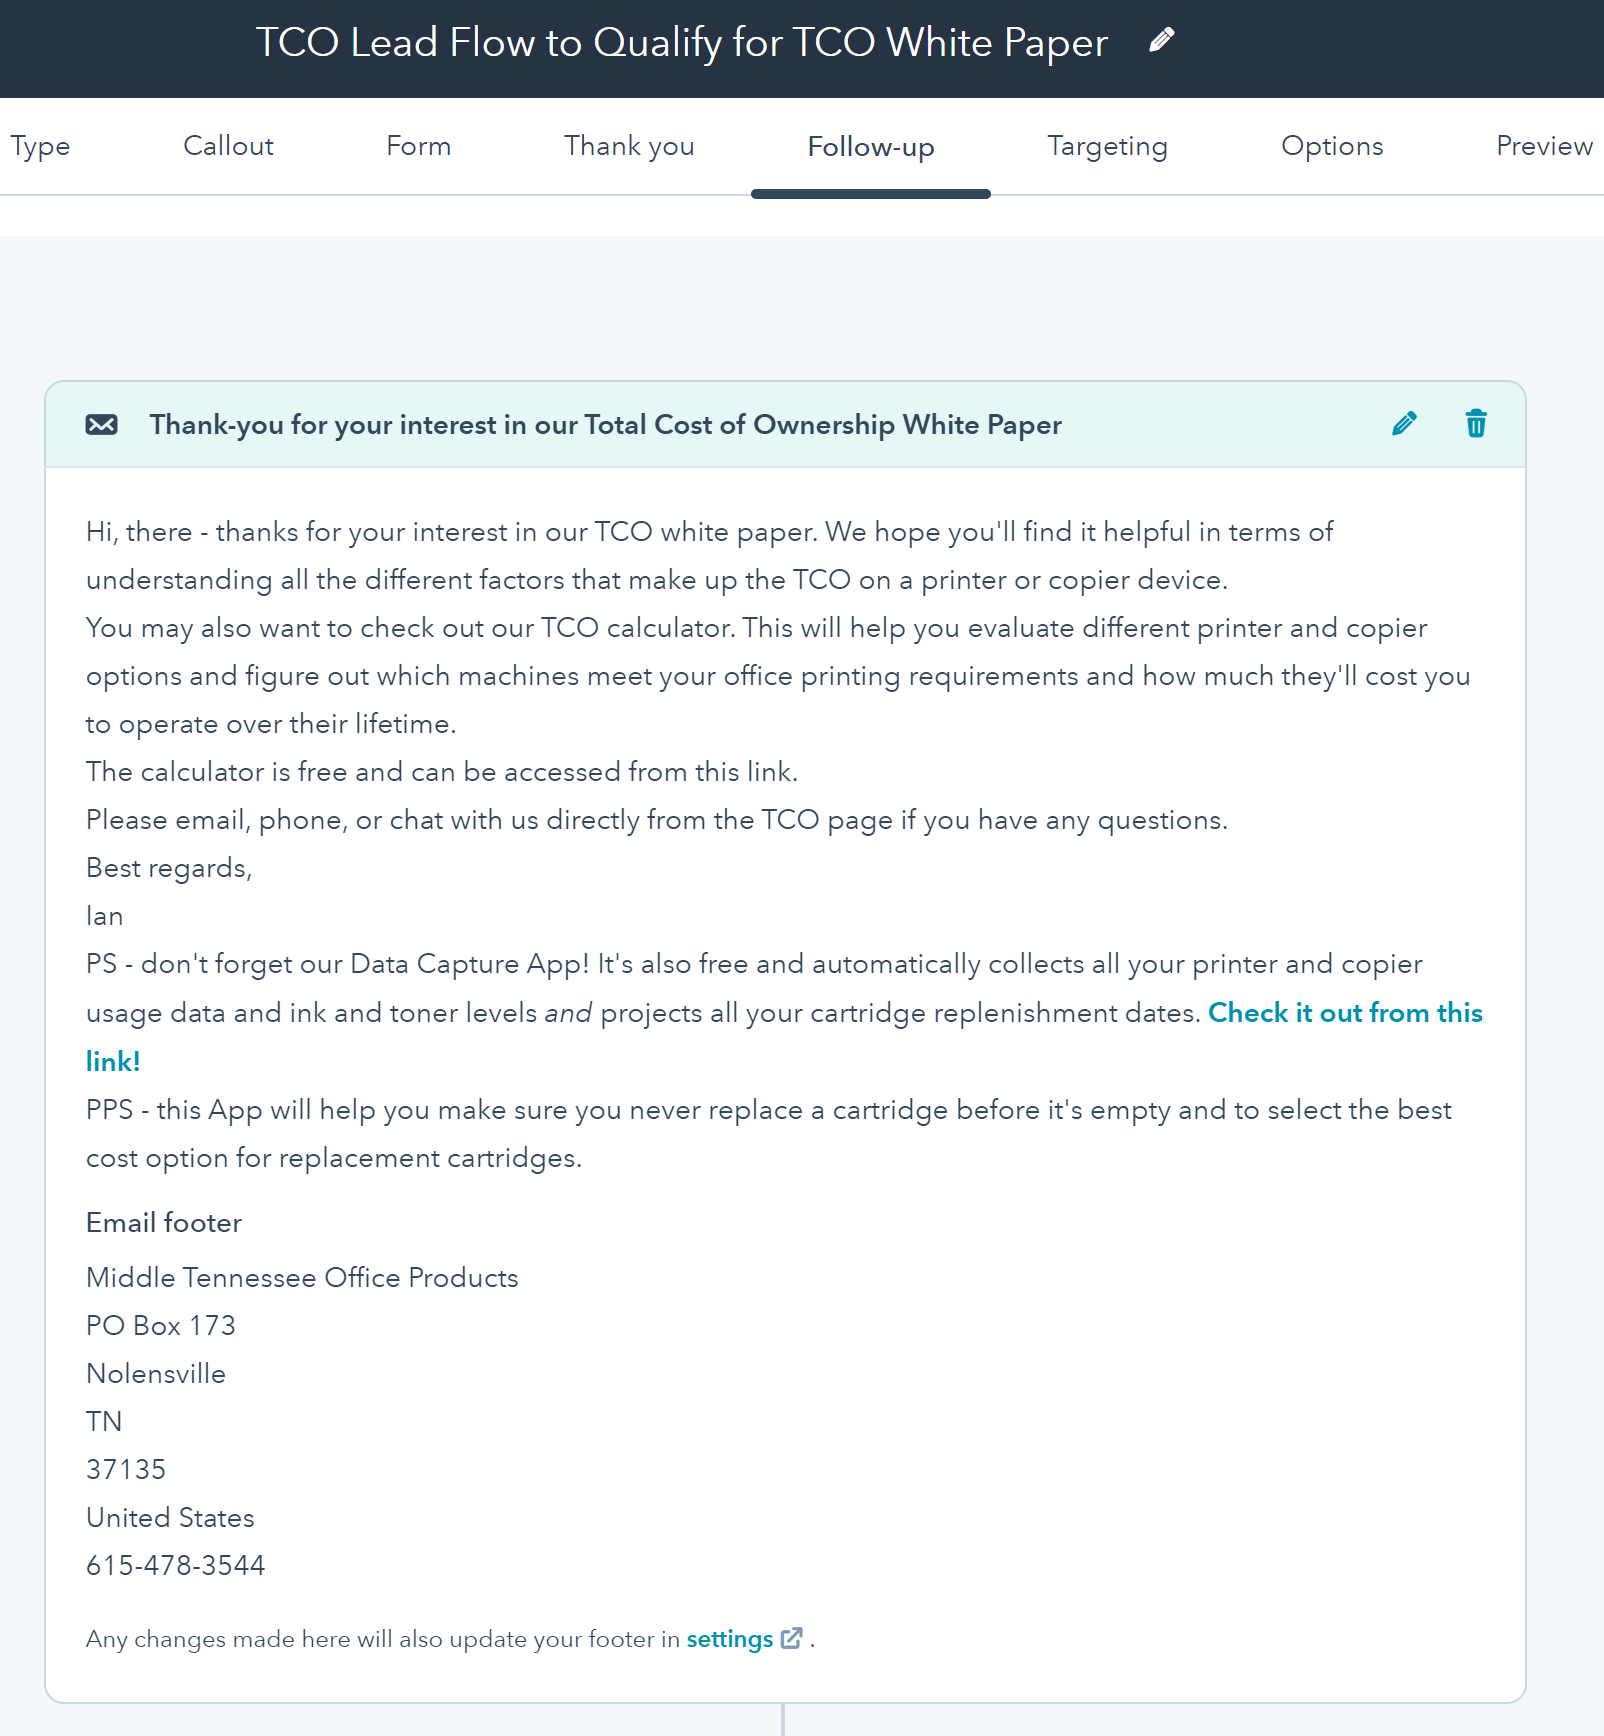 TCO White Paper Follow-up Email